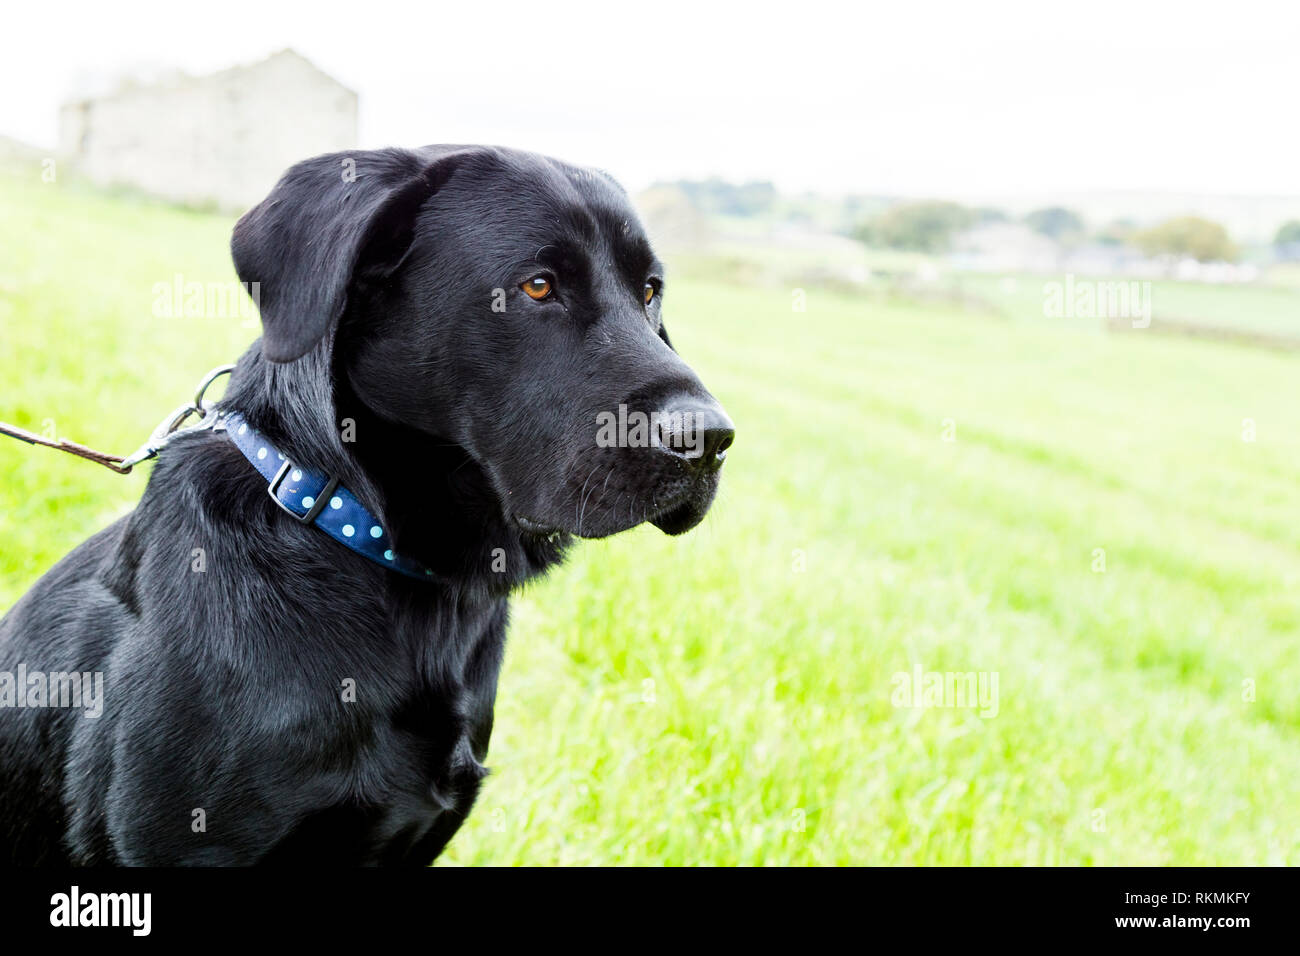 A black labrador retriever close up. He is in a field, attached to a lead. Stock Photo